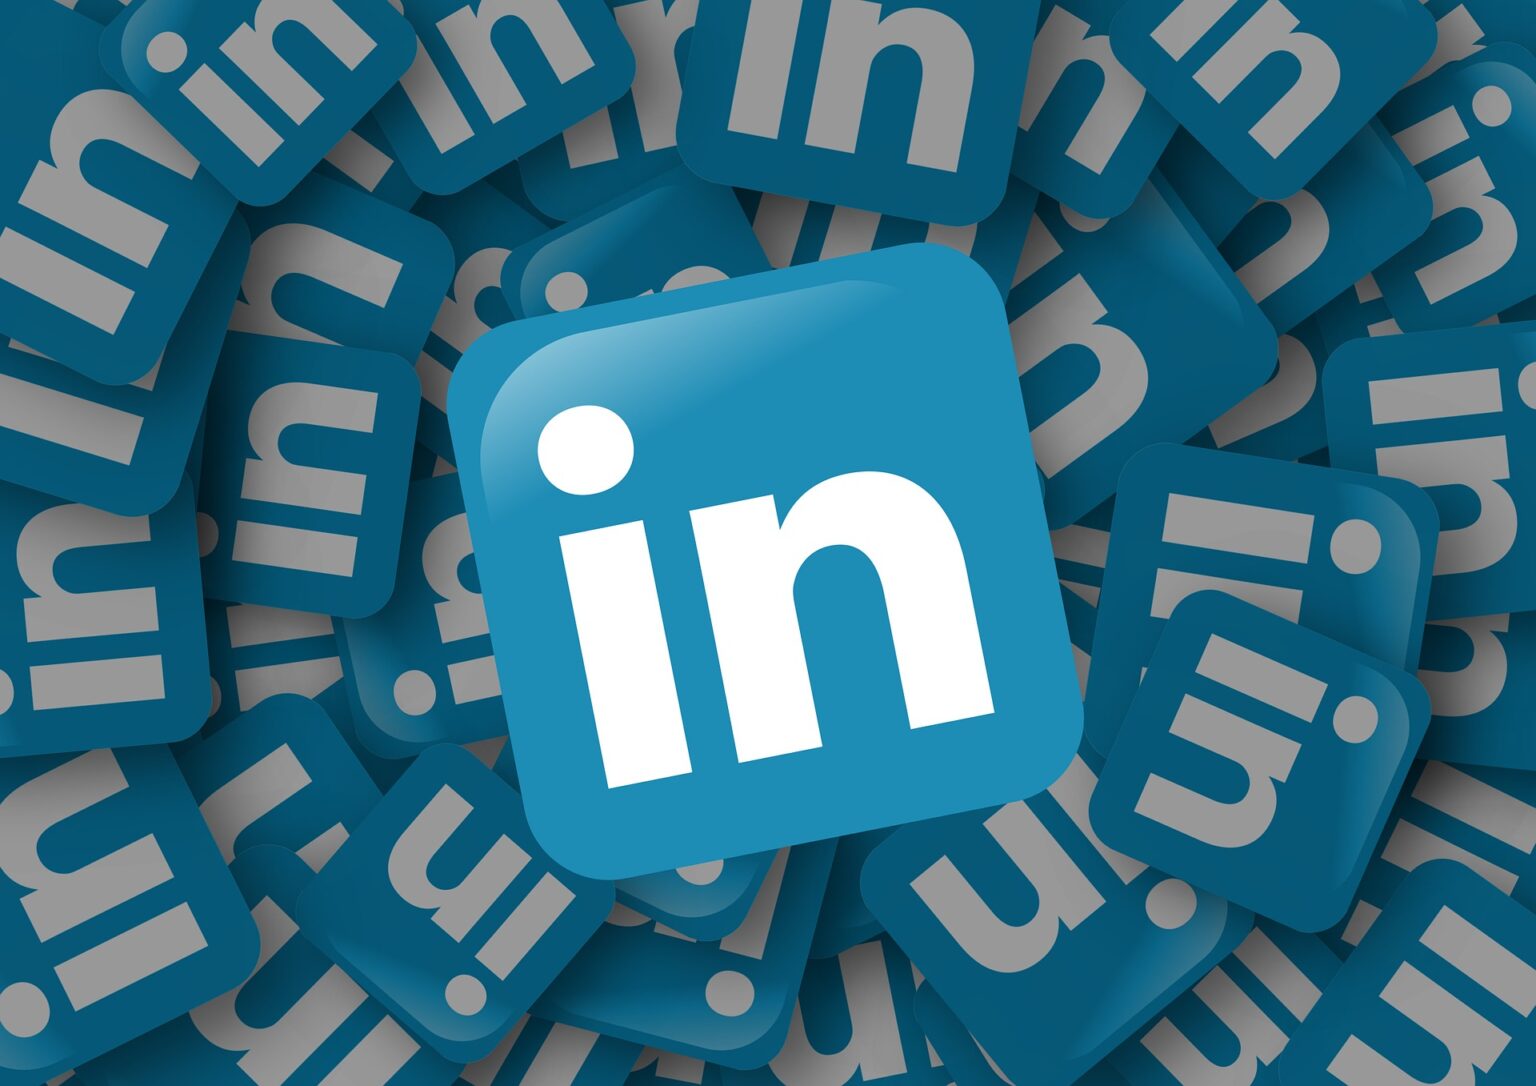 If you want to reach a huge audience and grow your business, you should try to become a LinkedIn influencer. Get some great tips & tricks right here.